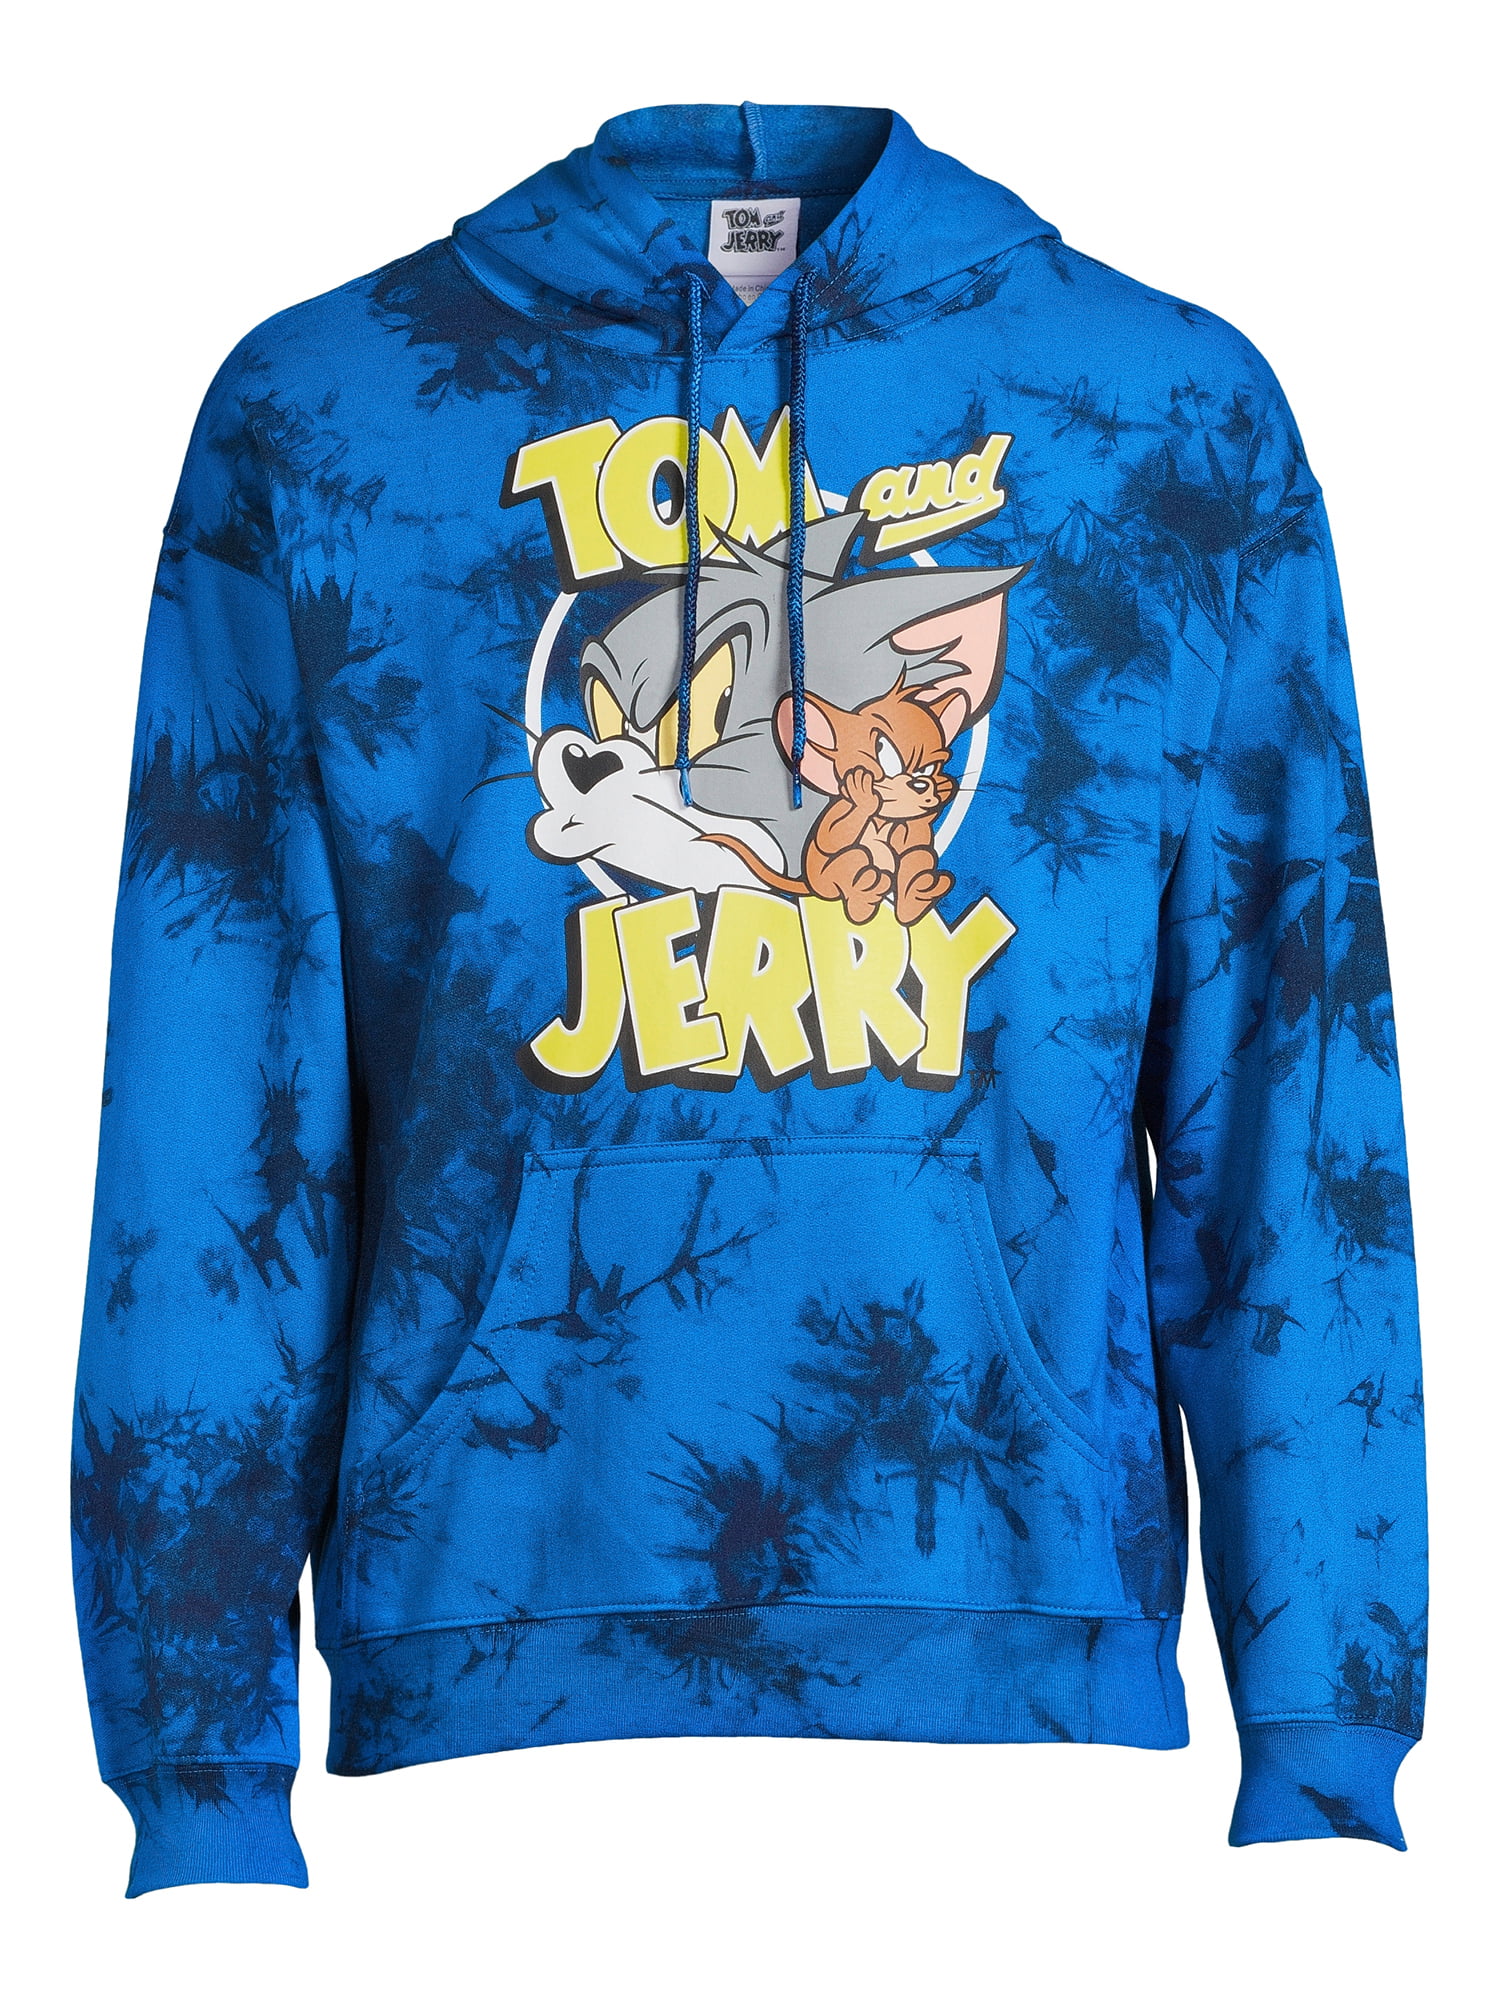 Tom and Jerry Men's Tie Dye Graphic Hoodie, Sizes S-3XL 